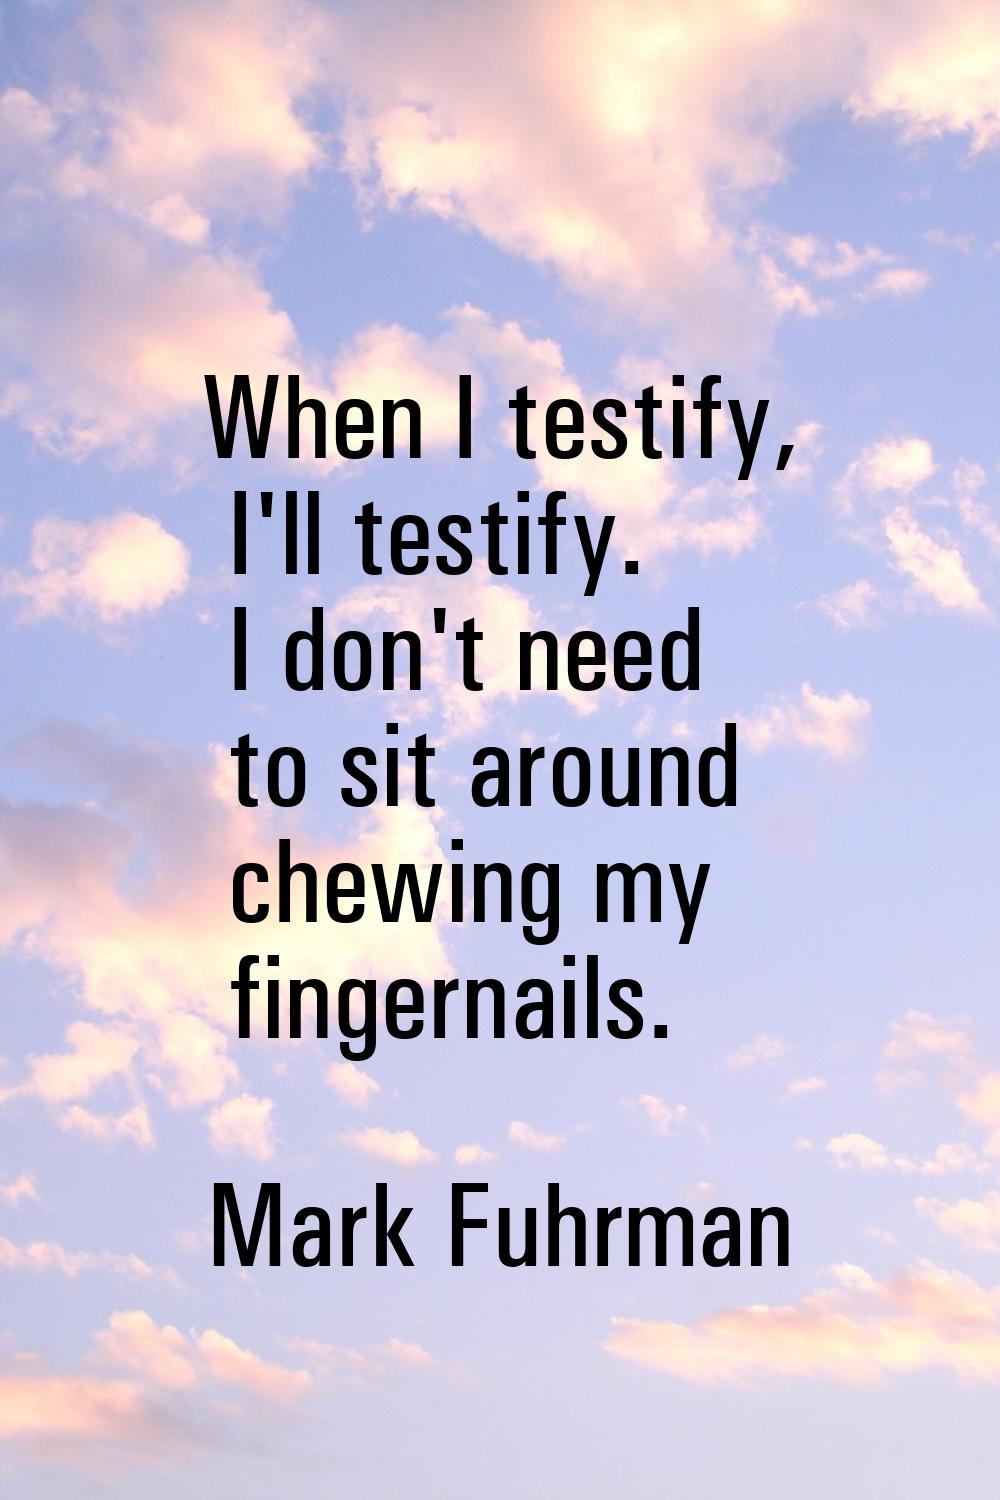 When I testify, I'll testify. I don't need to sit around chewing my fingernails.